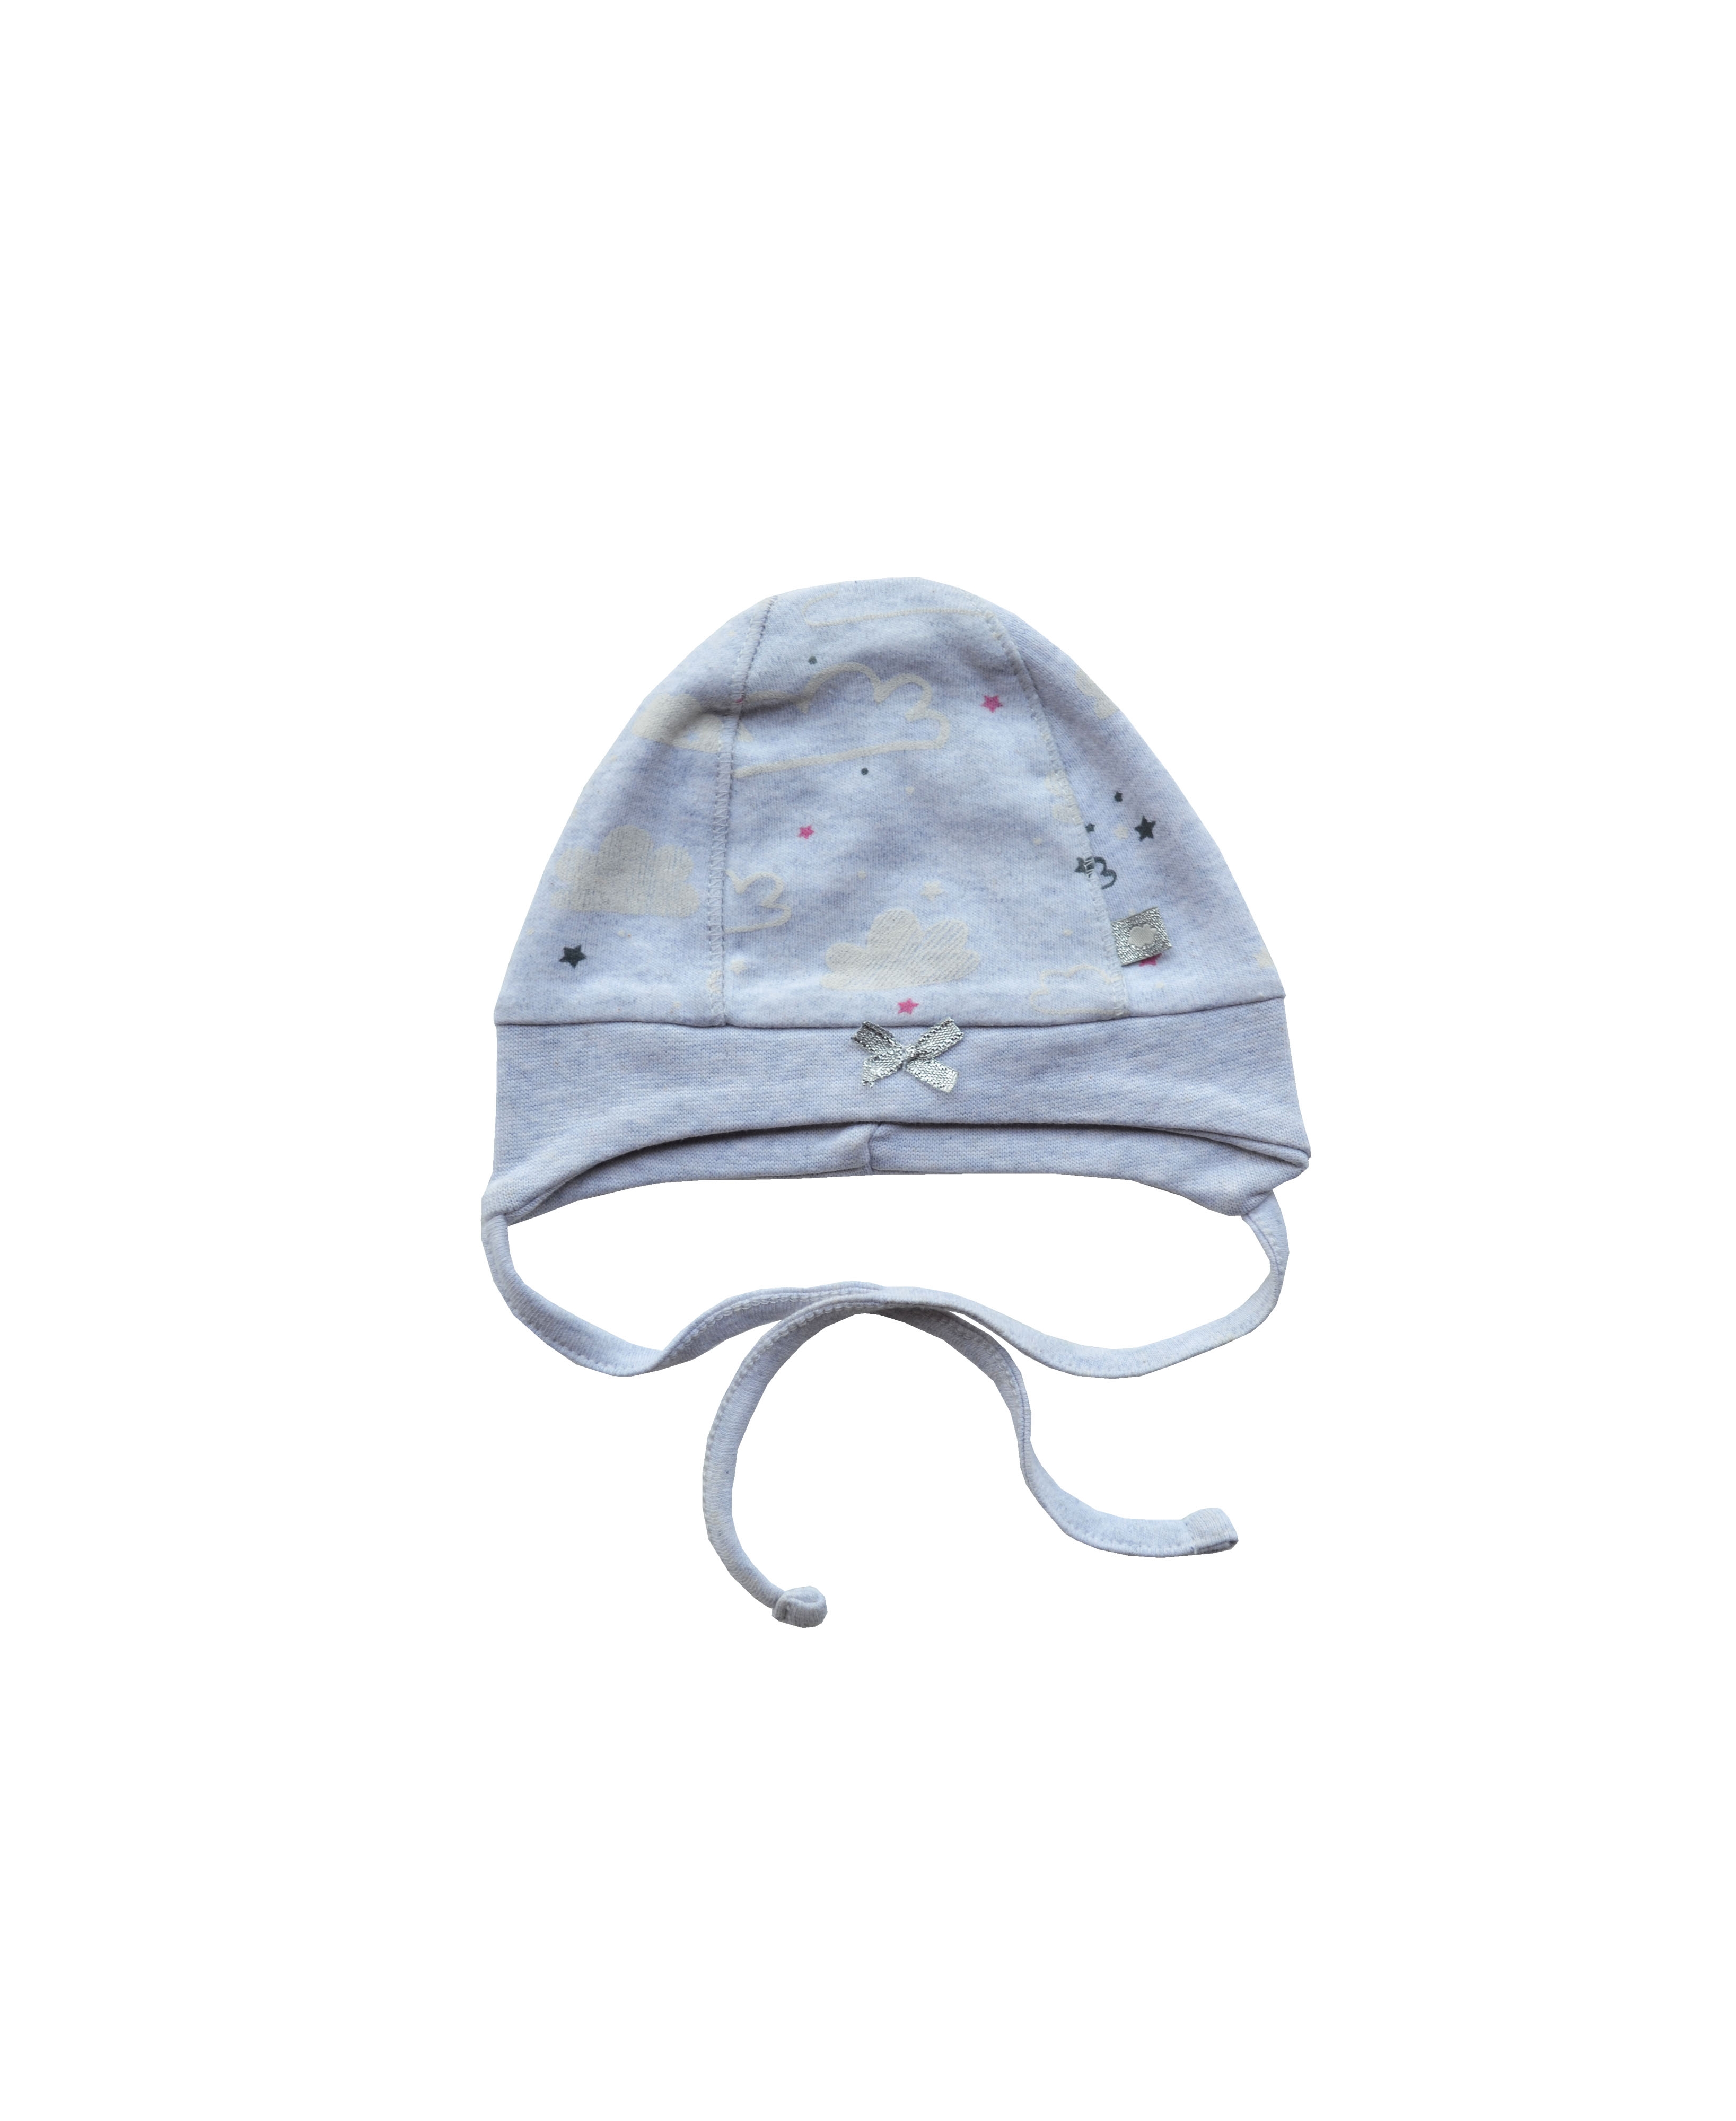 Grey Cap with Cloud Print and Silver Bow (100% Cotton Interlock)